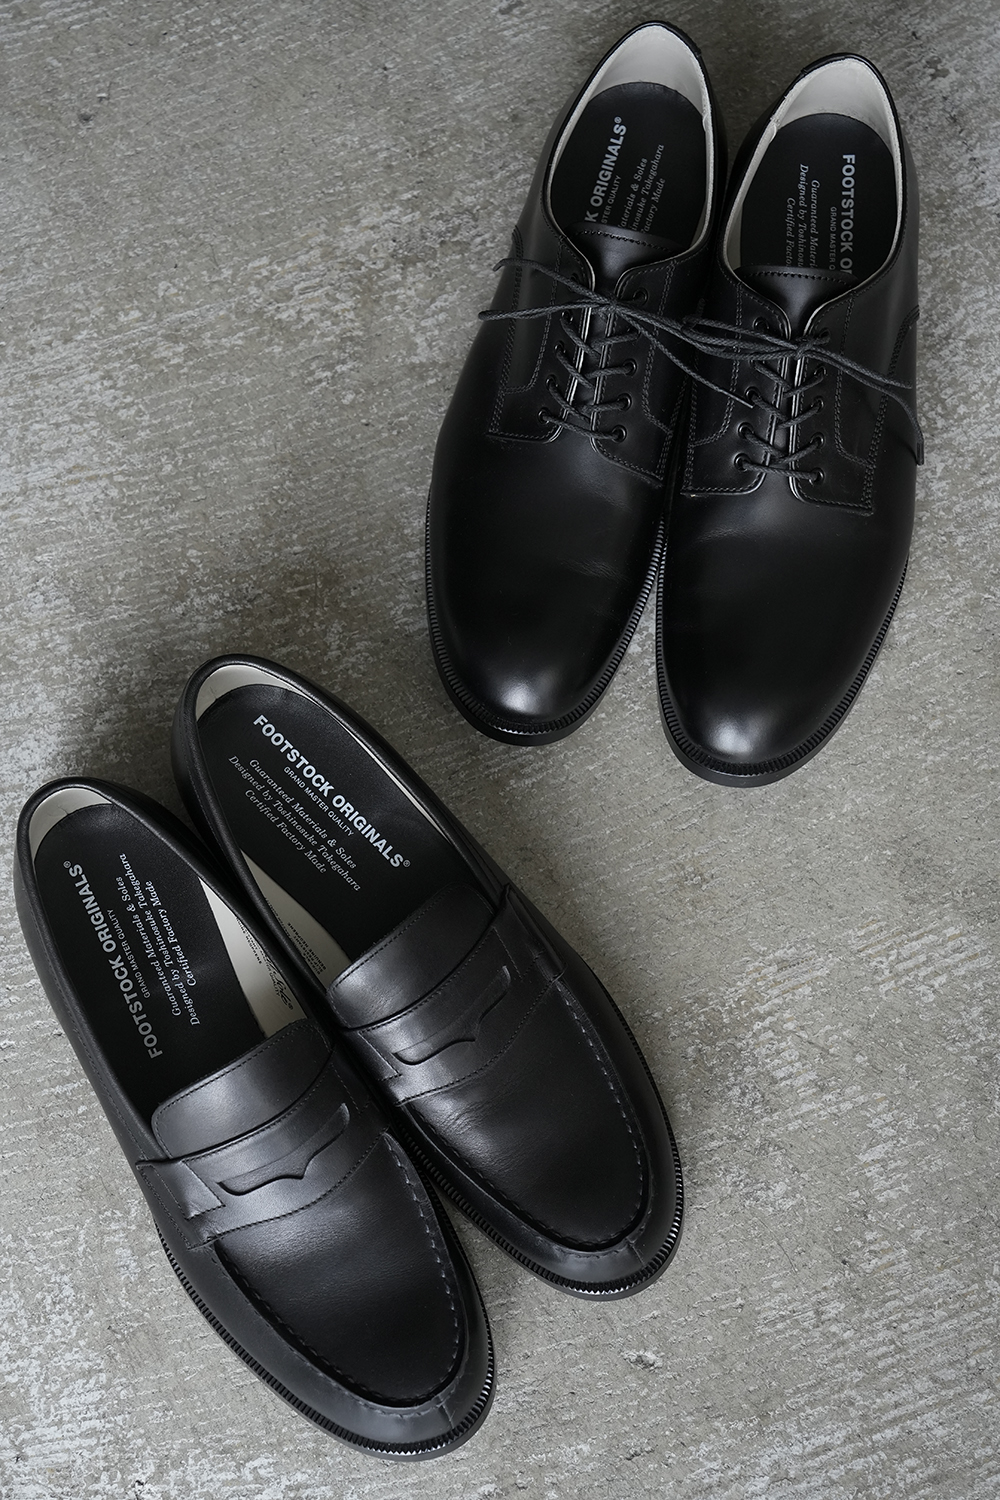 FOOTSTOCK ORIGINALS」SERVICEMAN SHOES ＆ LOAFER | ANOTHER LOUNGE